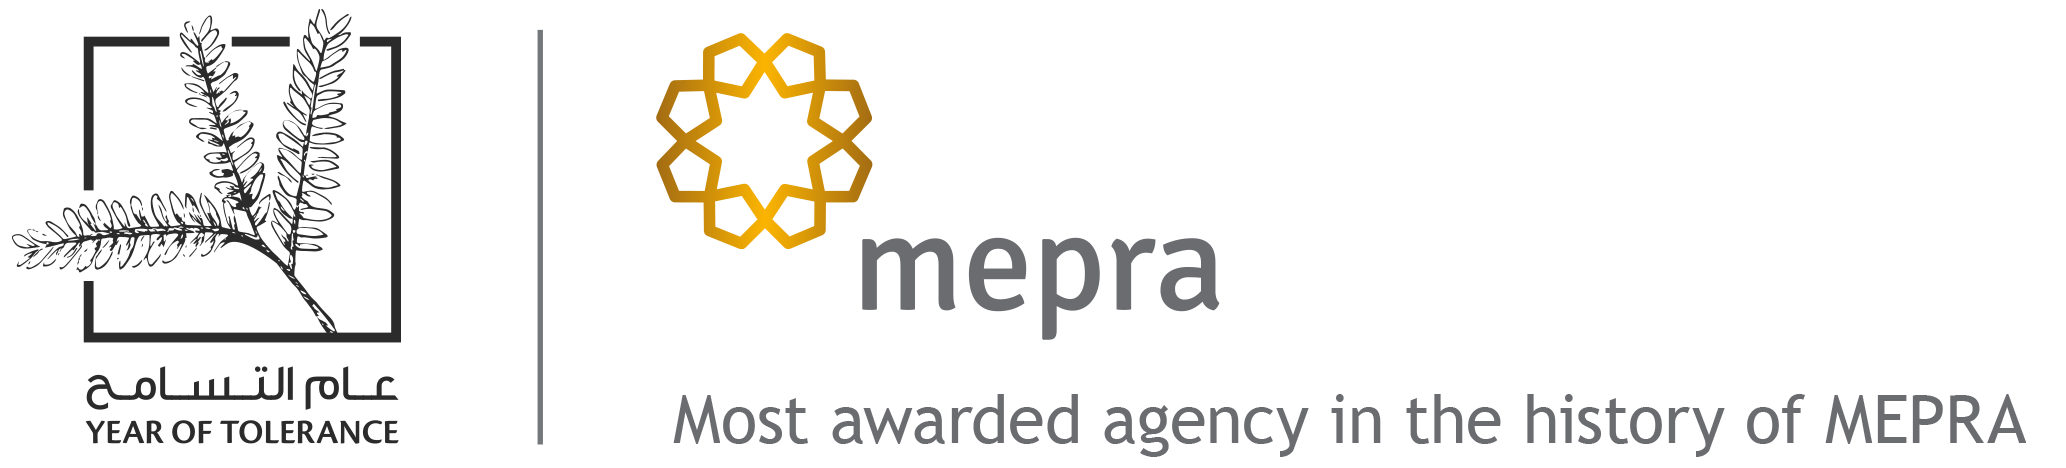 Most awarded agency in the history of MEPRA